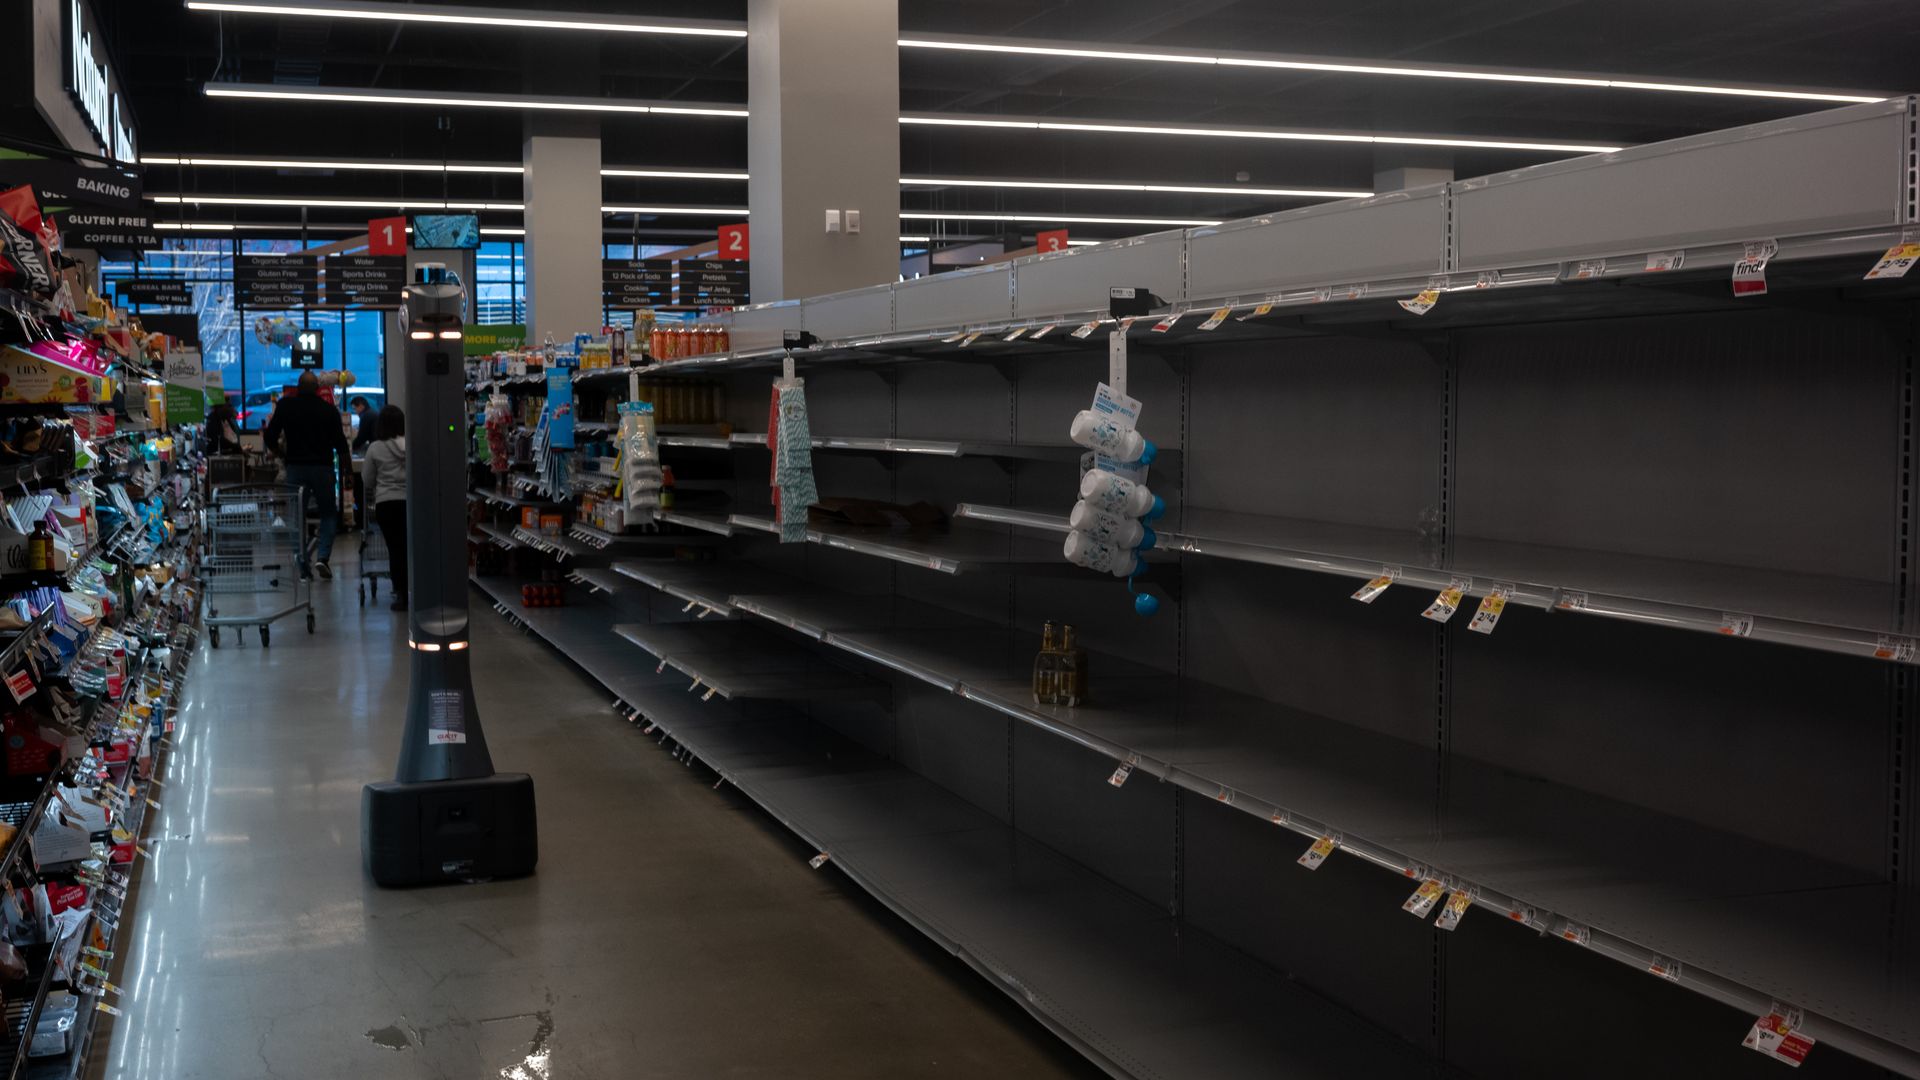  Sold out water section in Giant Supermarket in the Fairmount neighborhood of Philadelphia, Pa., on March 26, 2023.